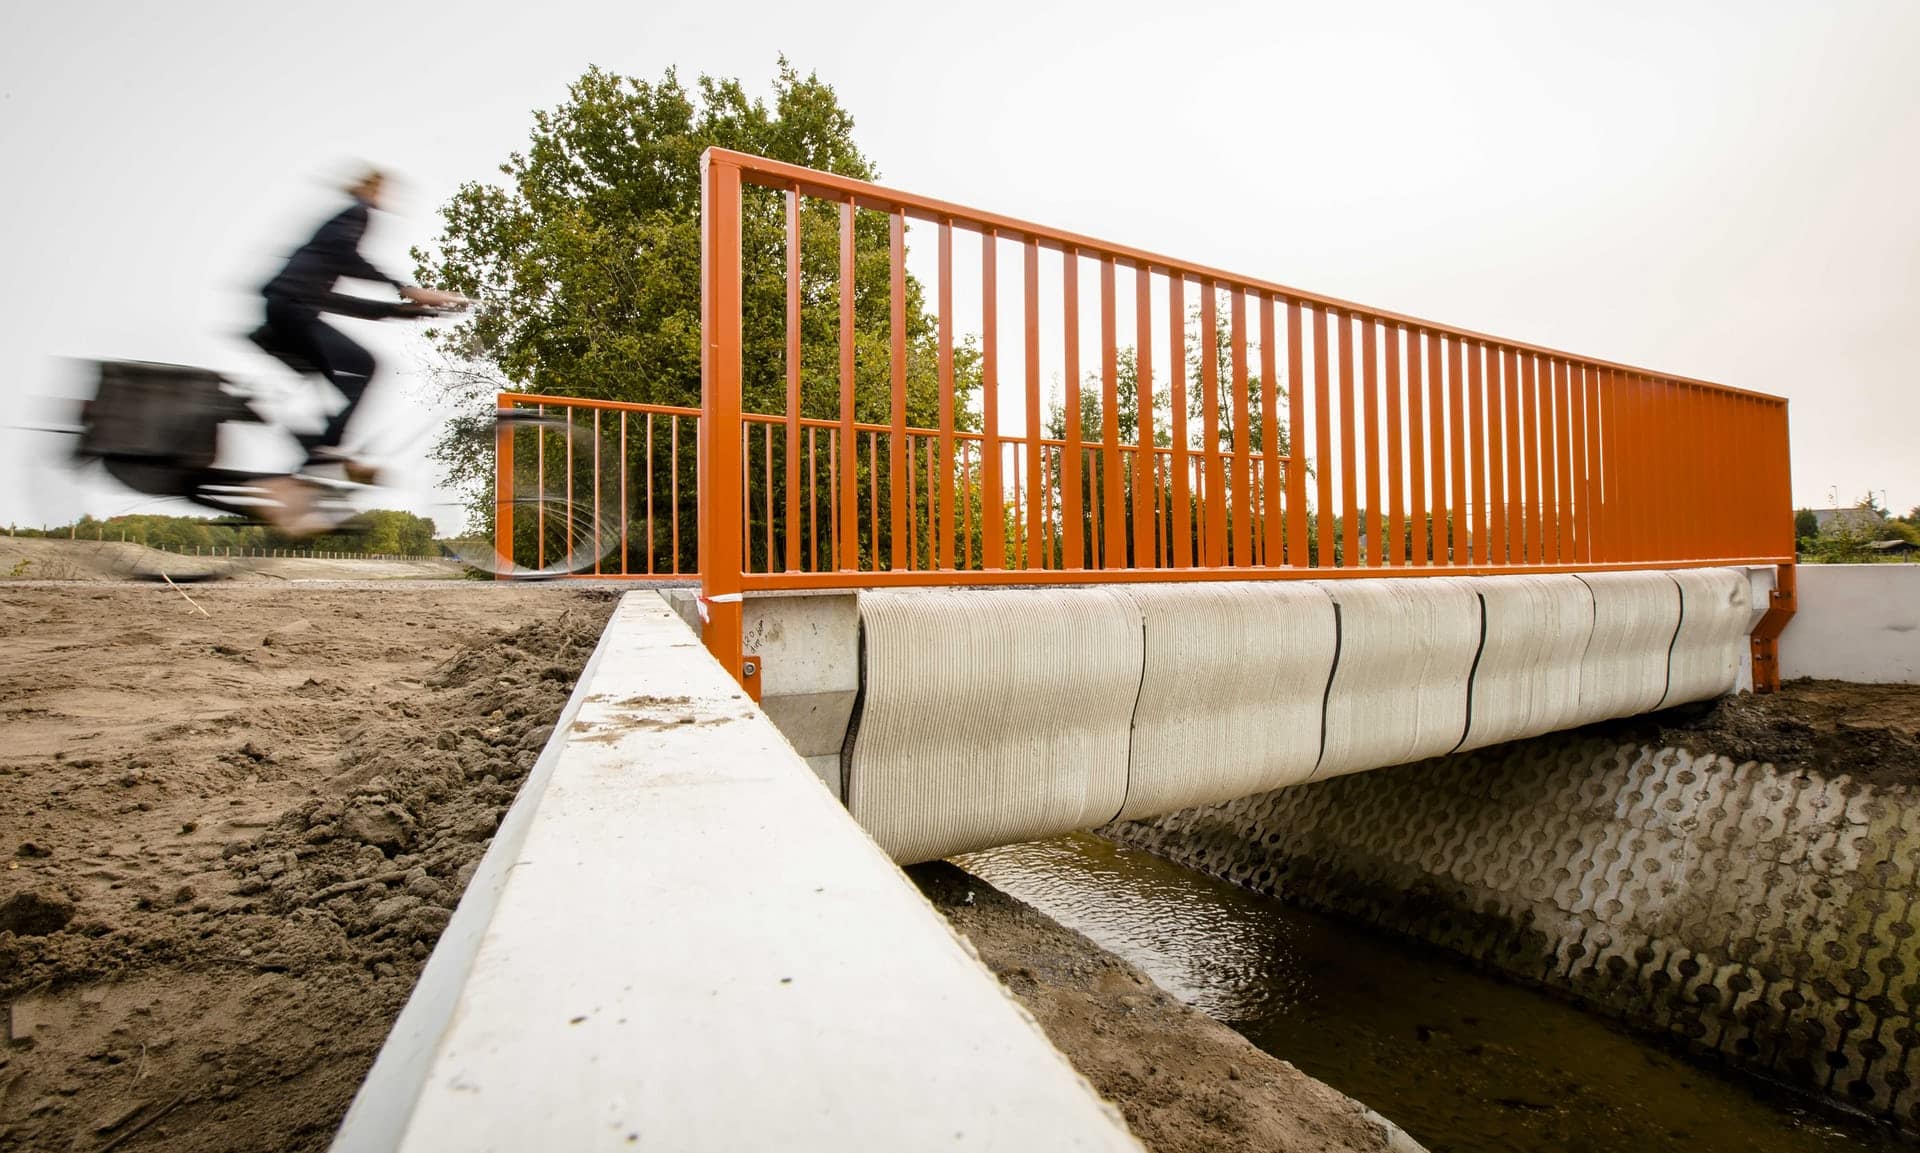 World's First 3D-Printed Bridge Opens To Cyclists In Netherlands ... - 3D PrinteD BriDge